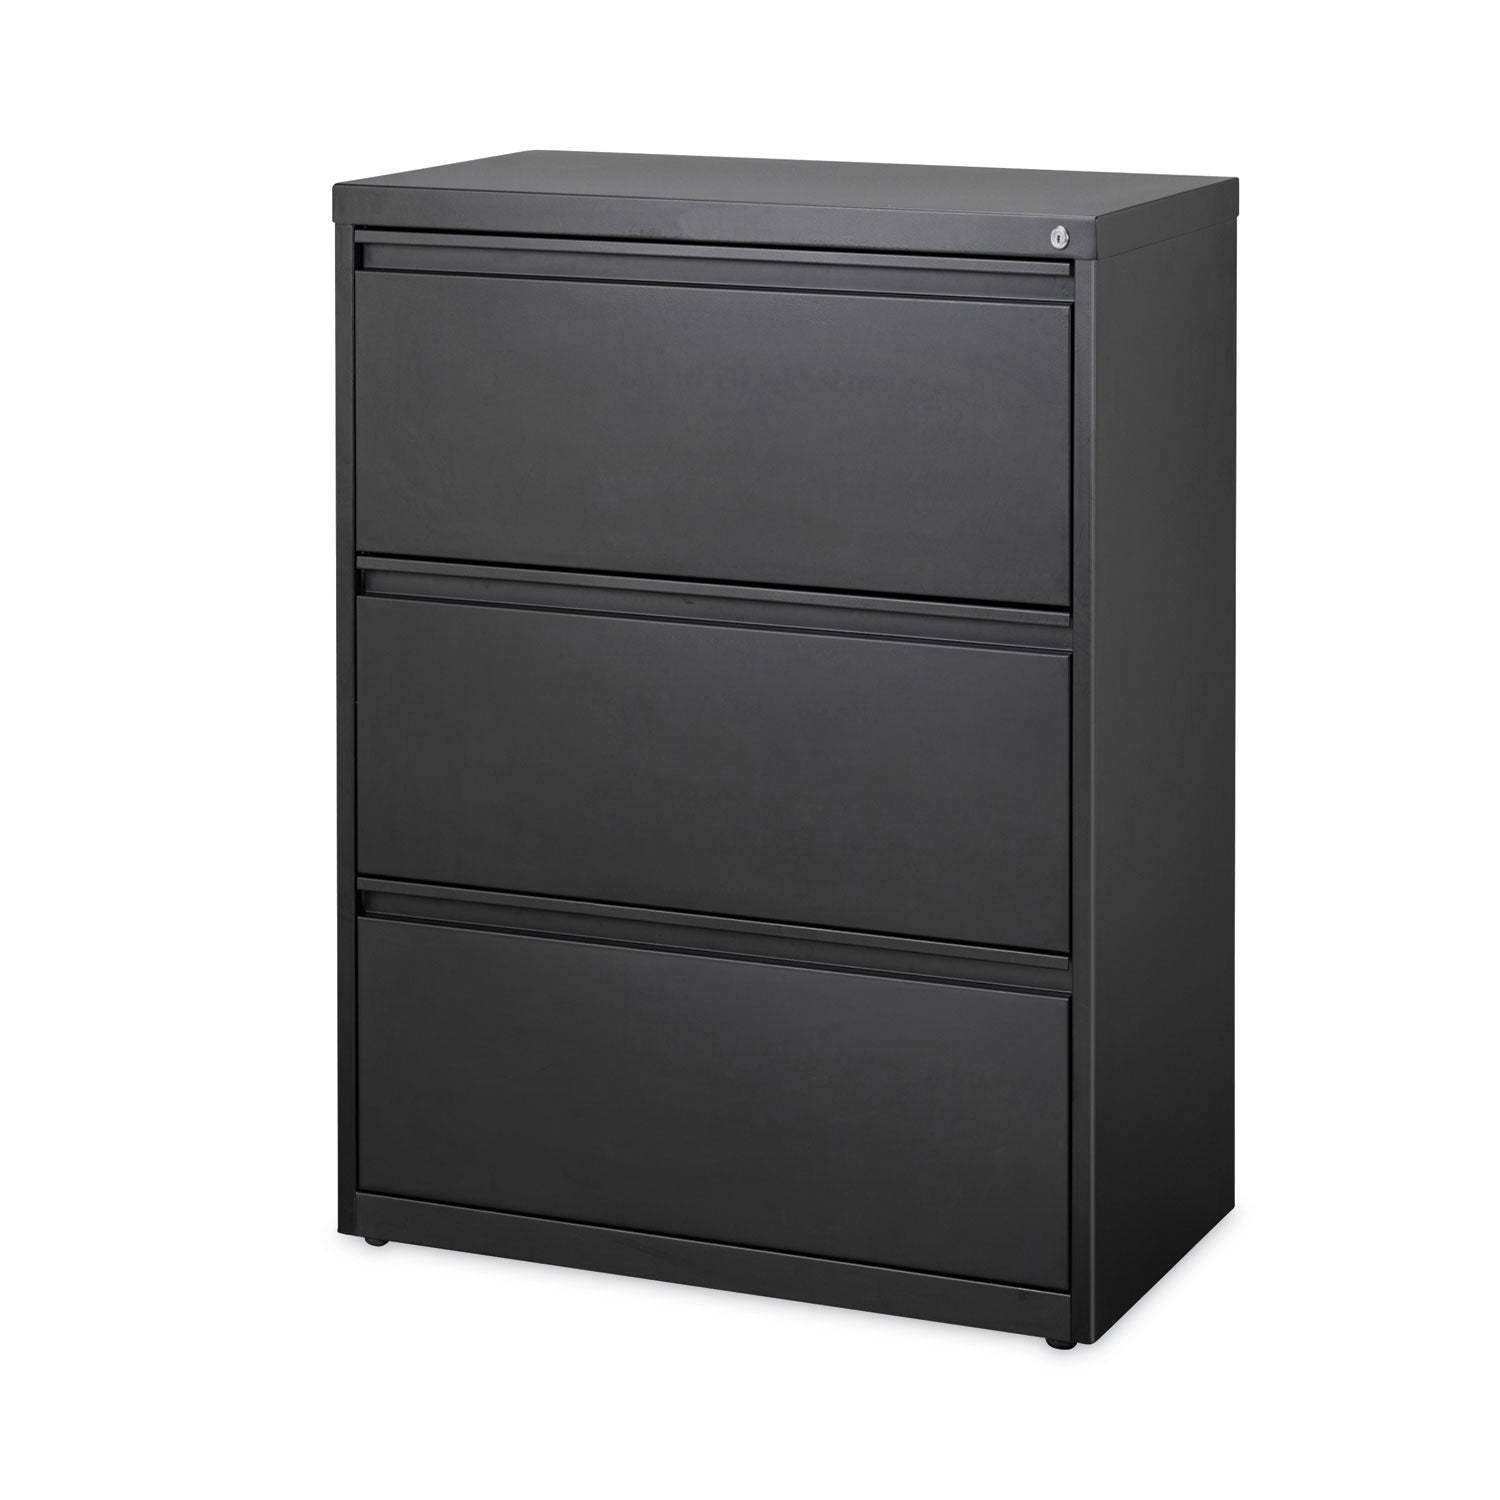 lateral-file-cabinet-3-letter-legal-a4-size-file-drawers-black-30-x-1862-x-4025_hid14974 - 1